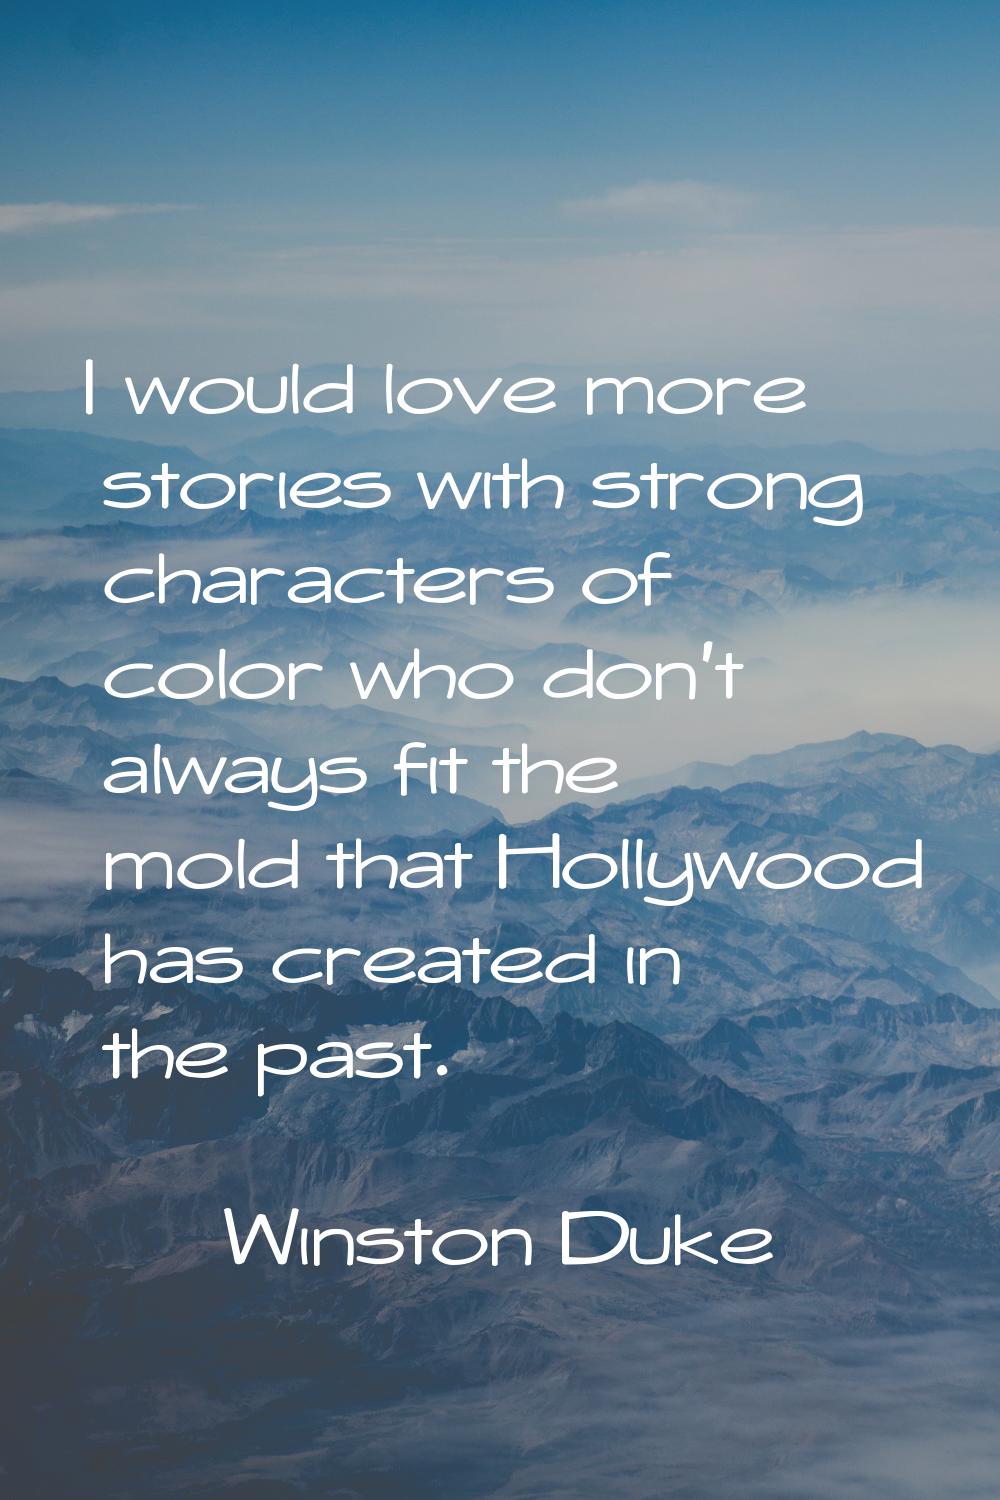 I would love more stories with strong characters of color who don't always fit the mold that Hollyw